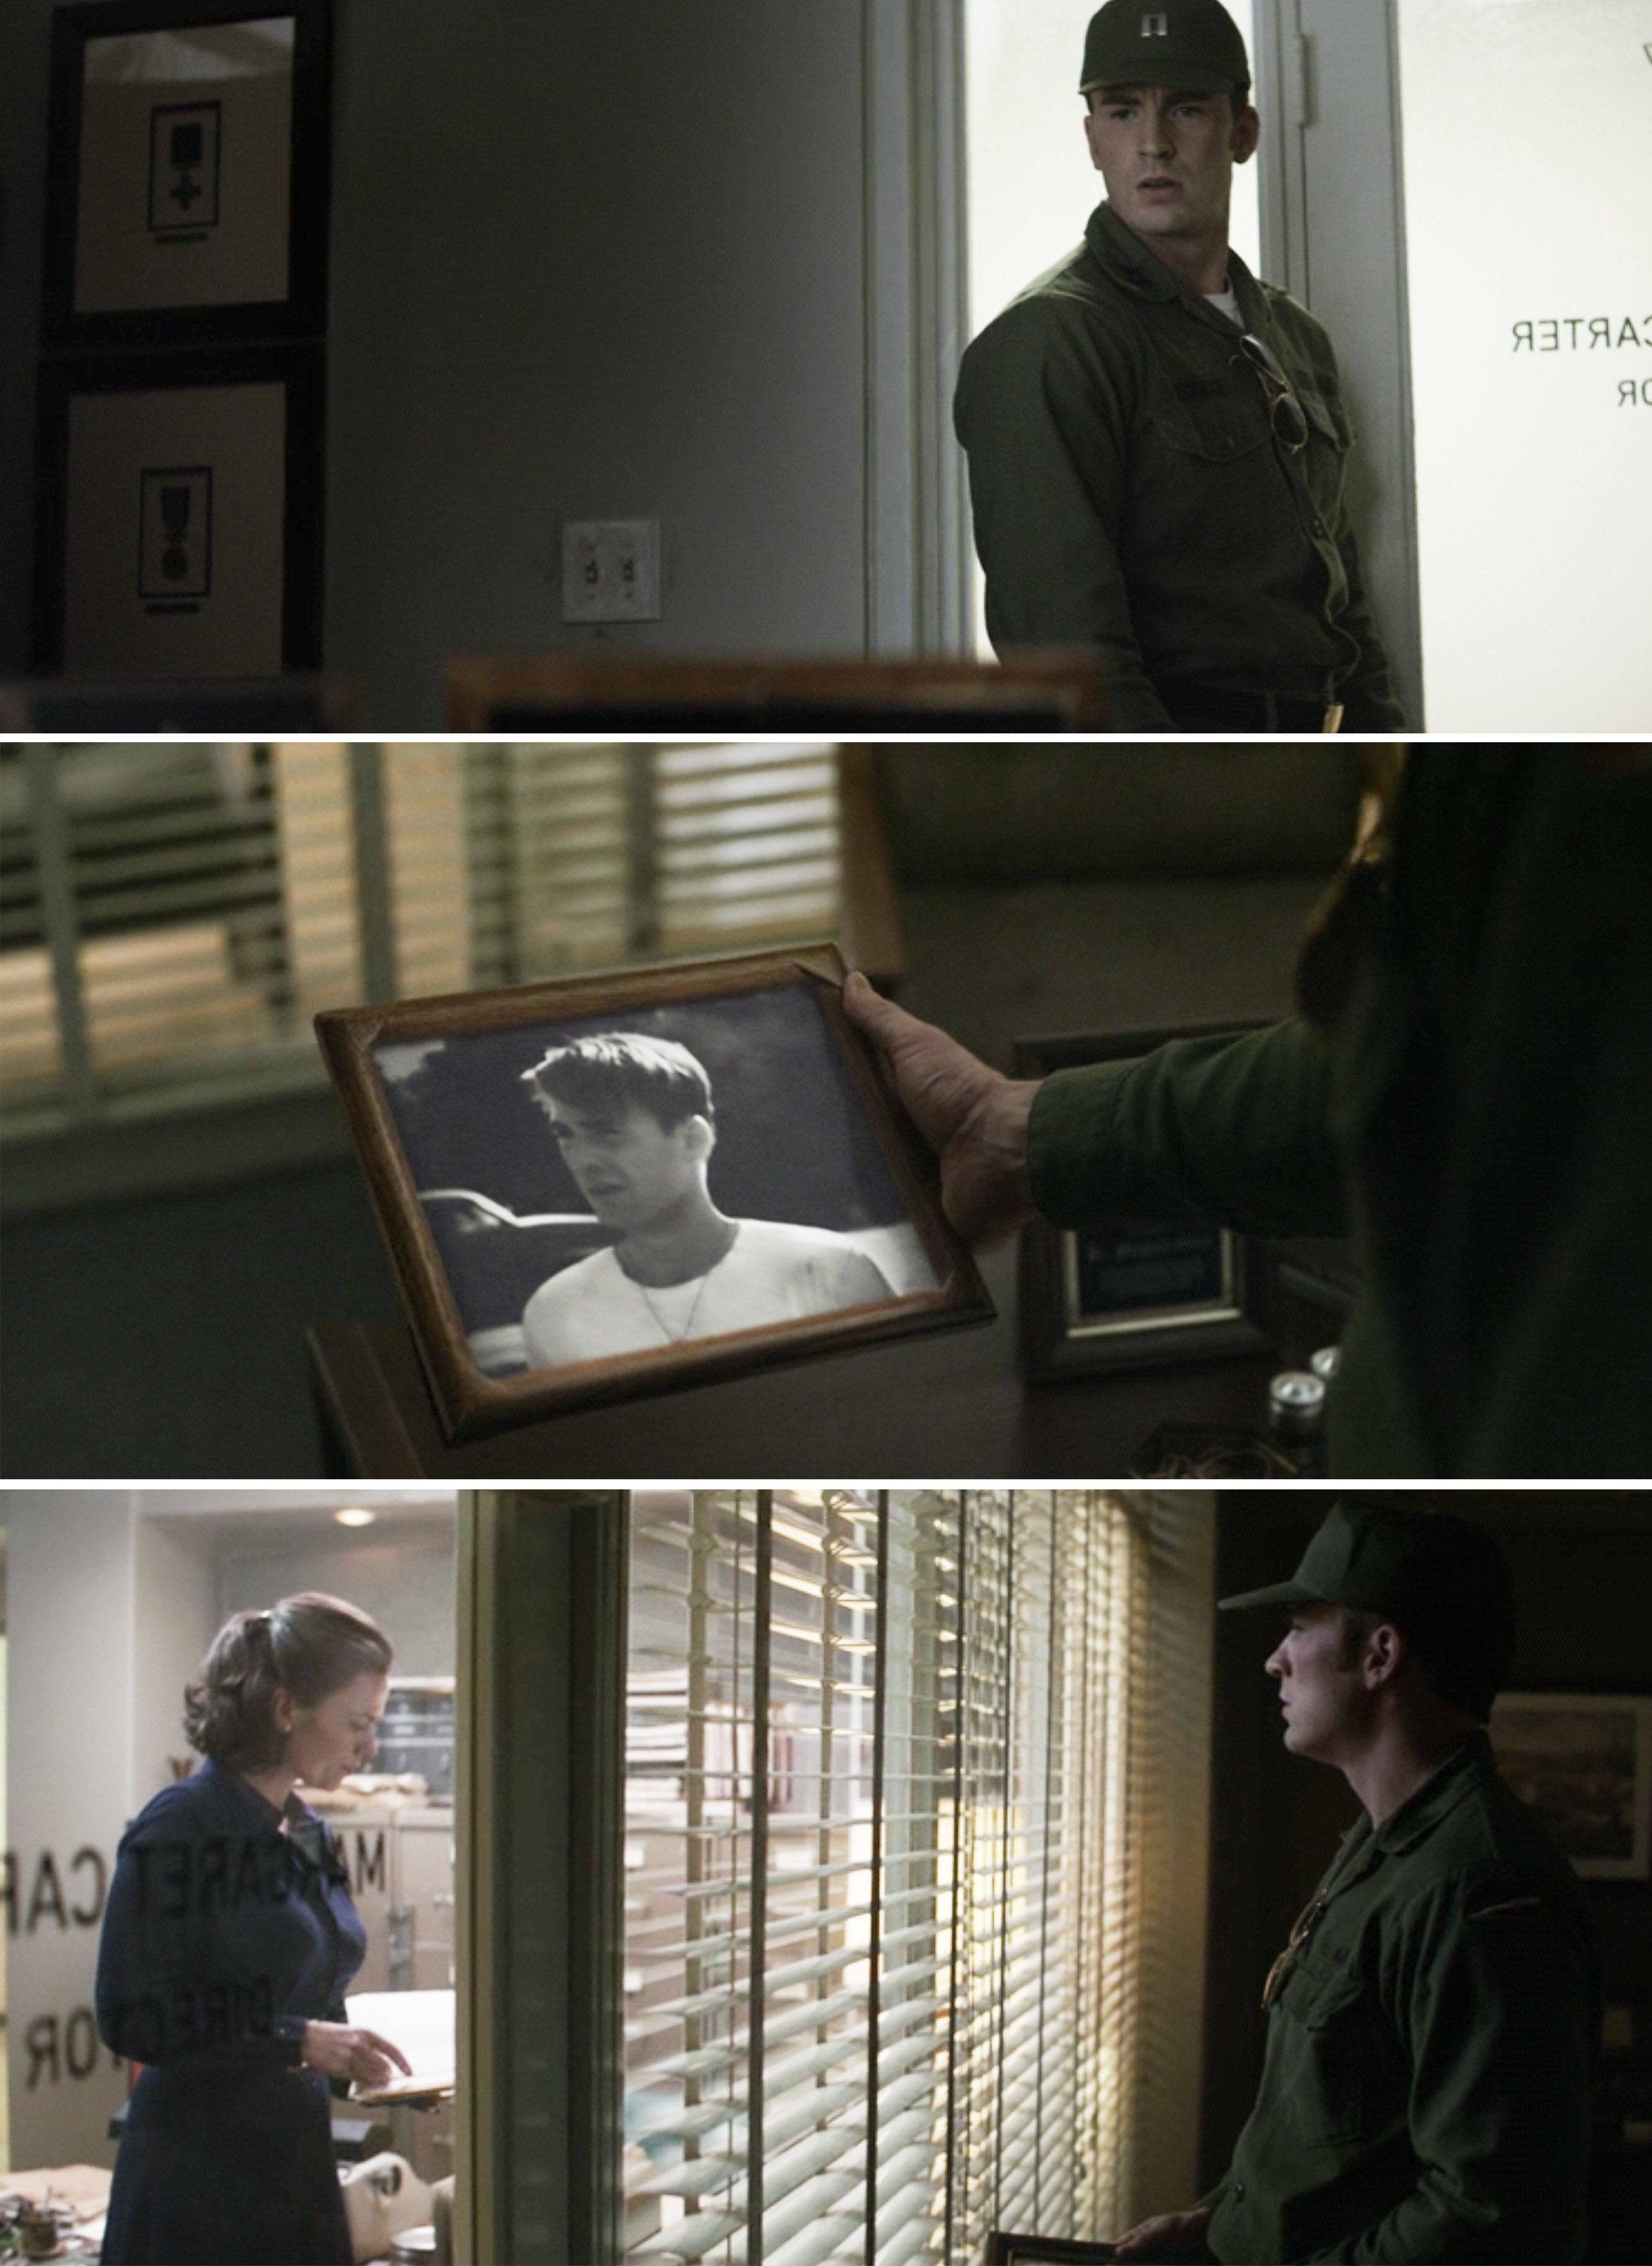 Steve holding an old picture of himself and spotting Peggy through a window